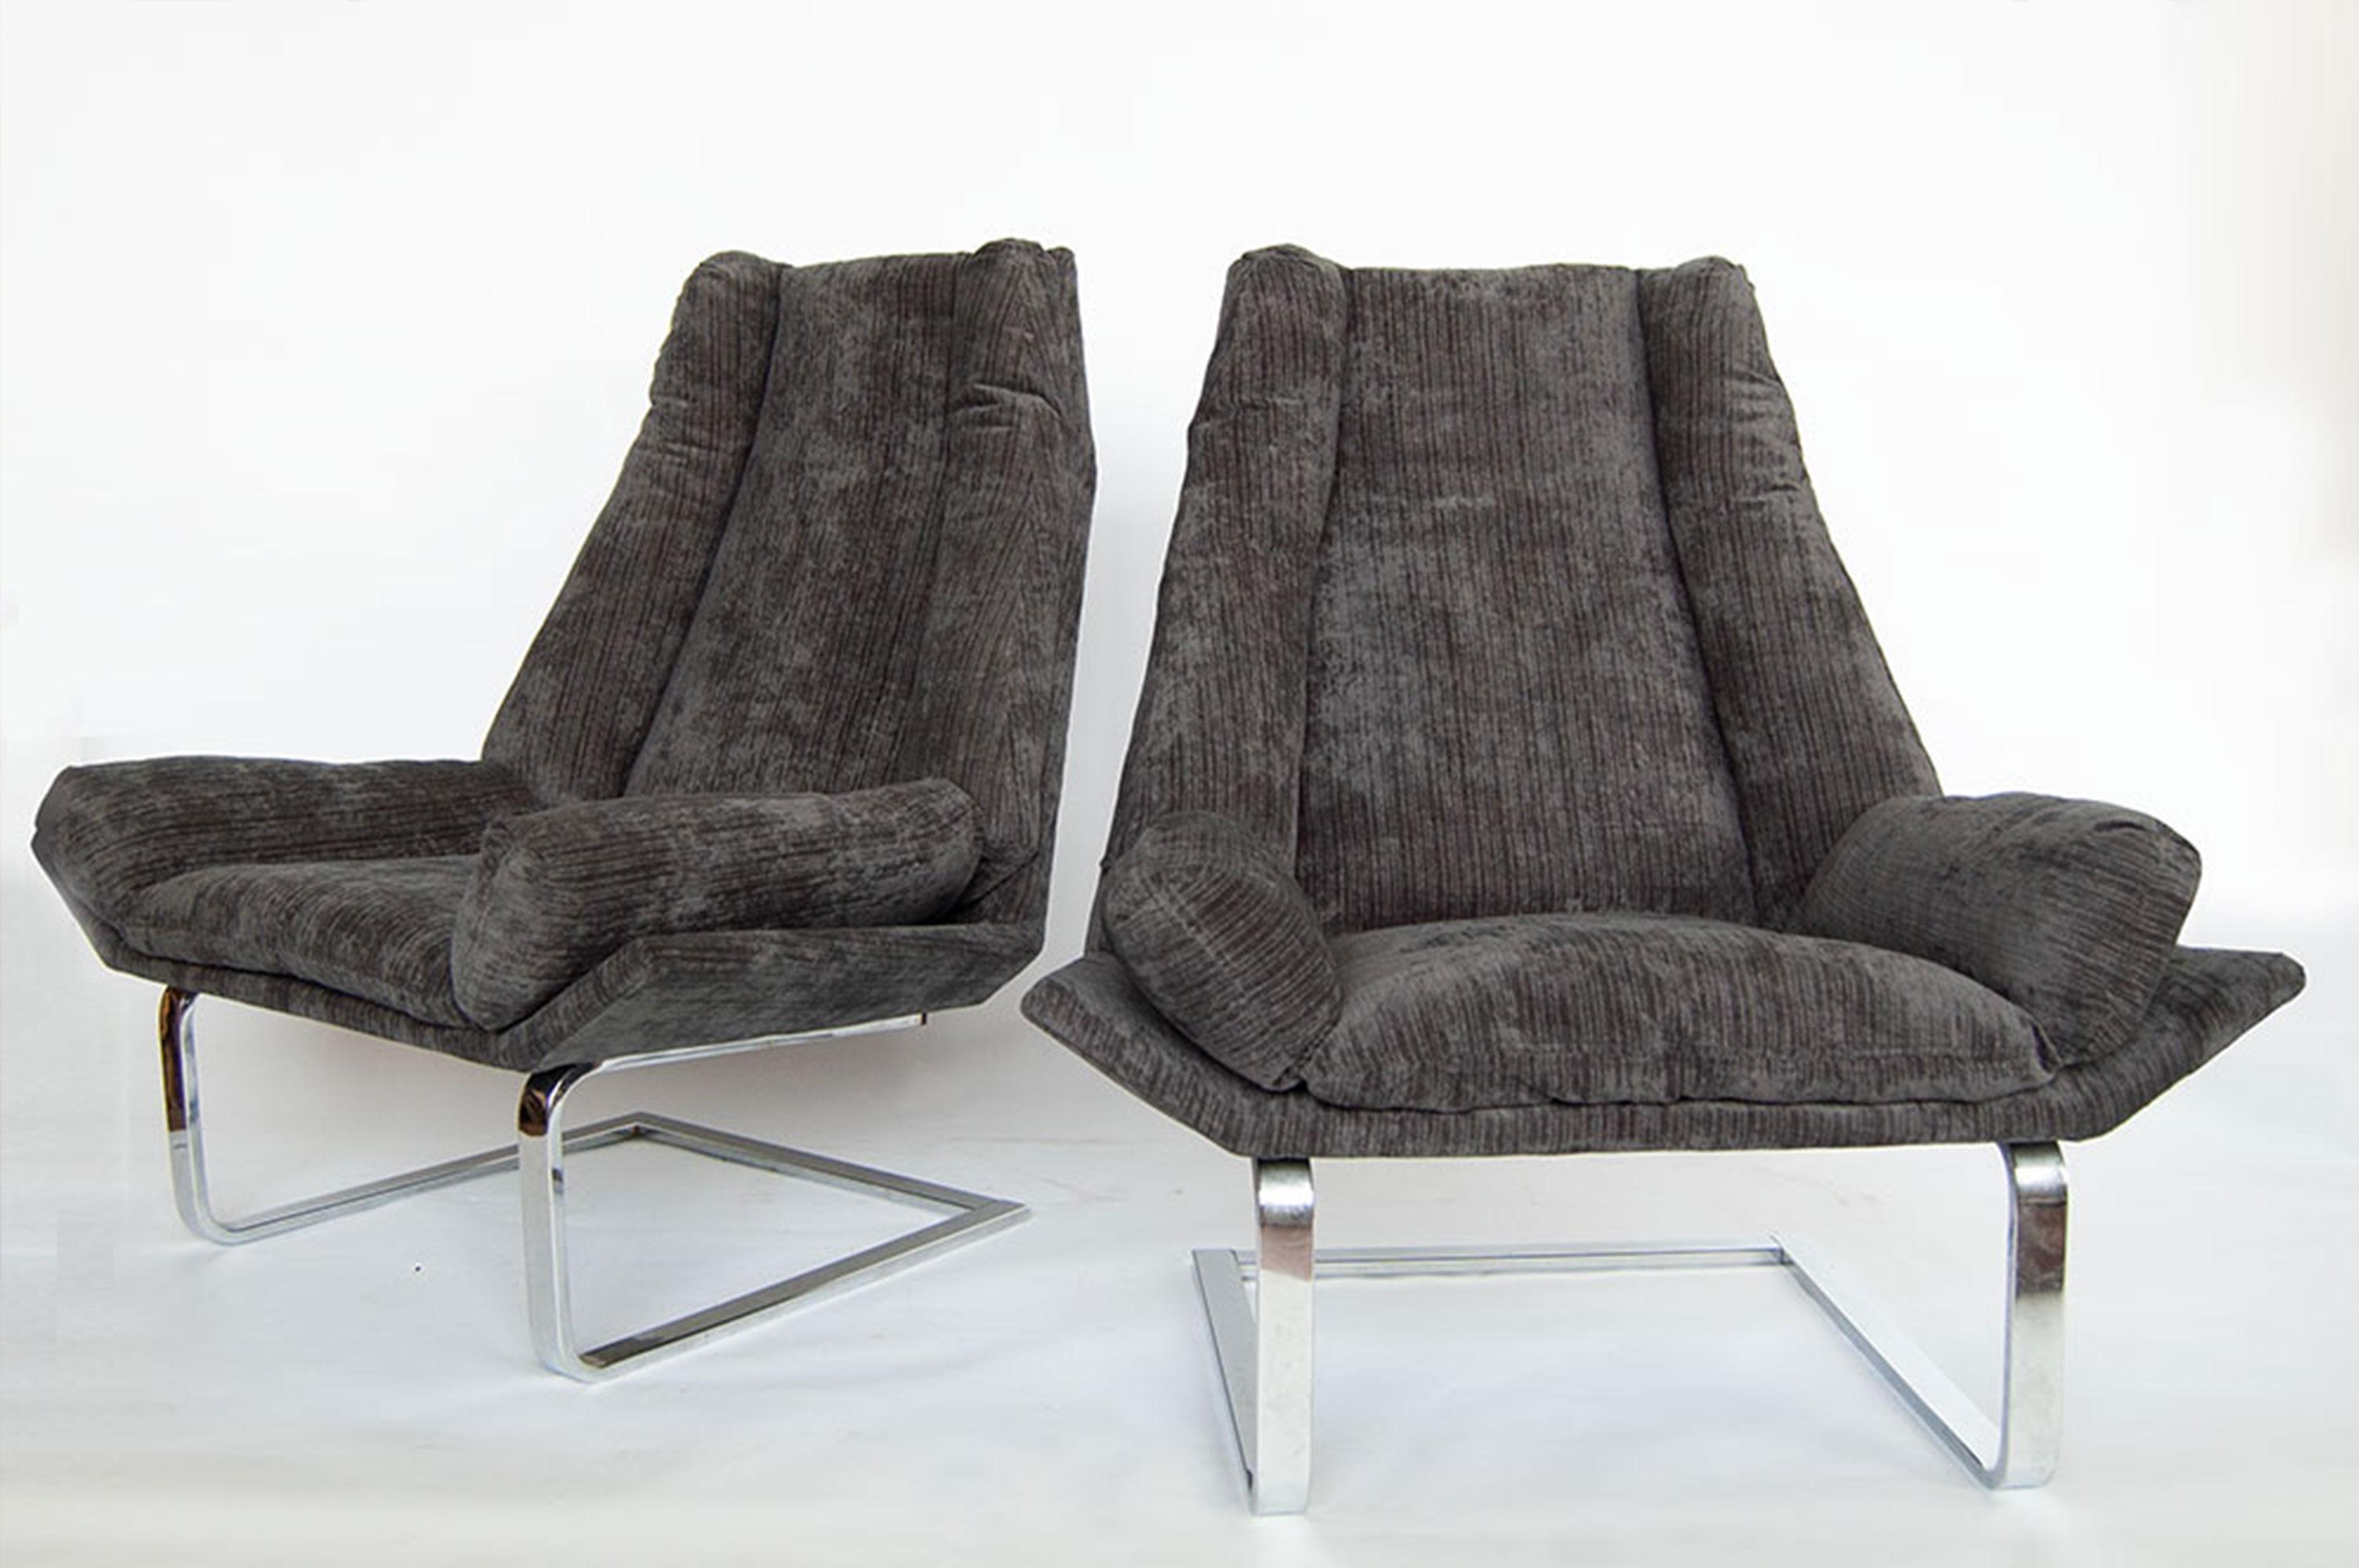 Two are better than one. Exceptional pair of modern wing chairs by Design Institute of America DIA. Newly upholstered in a smoke chenille that gives a nod to gentleman’s suiting. The generous seat is supported by a solid chrome cantilevered base